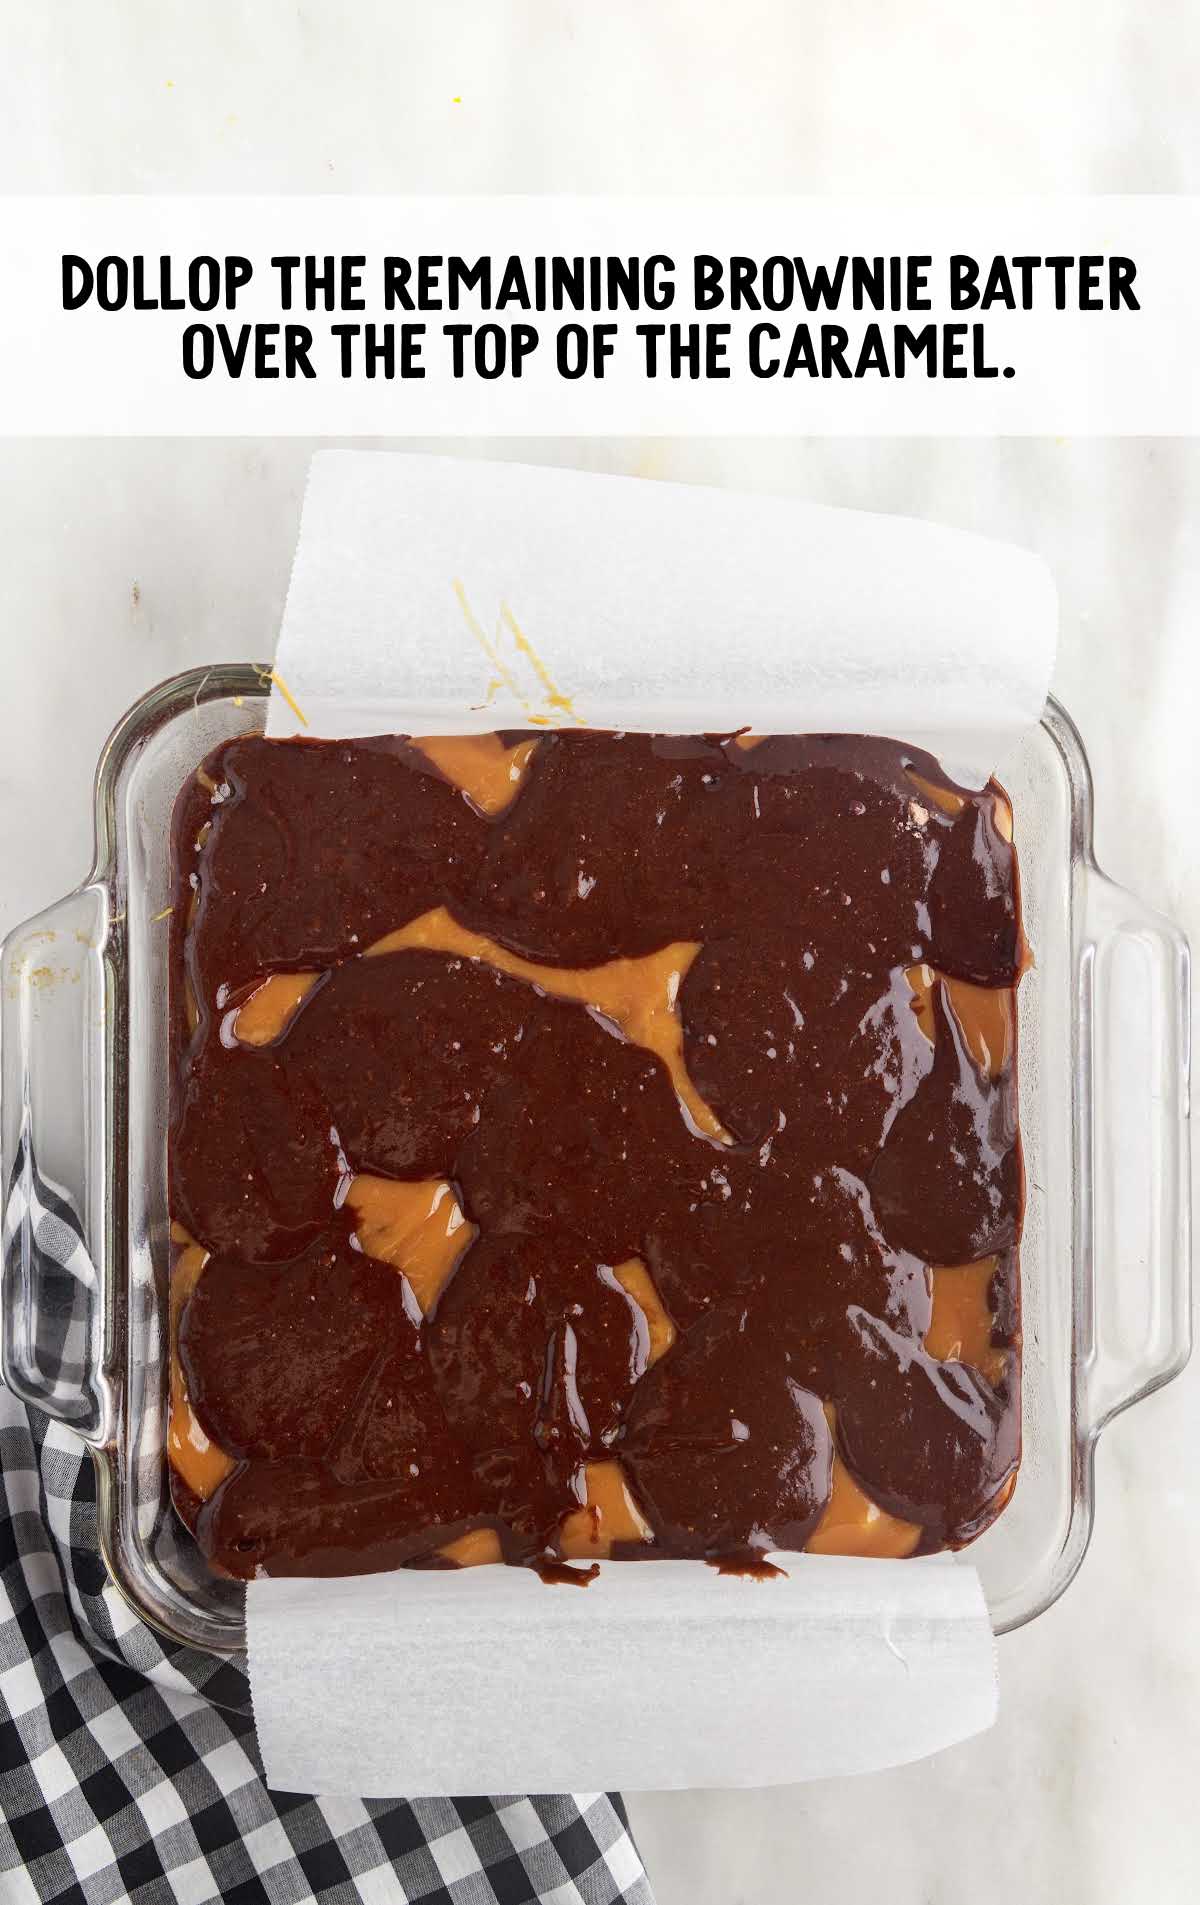 brownie batter spread over top of the caramel in the baking dish